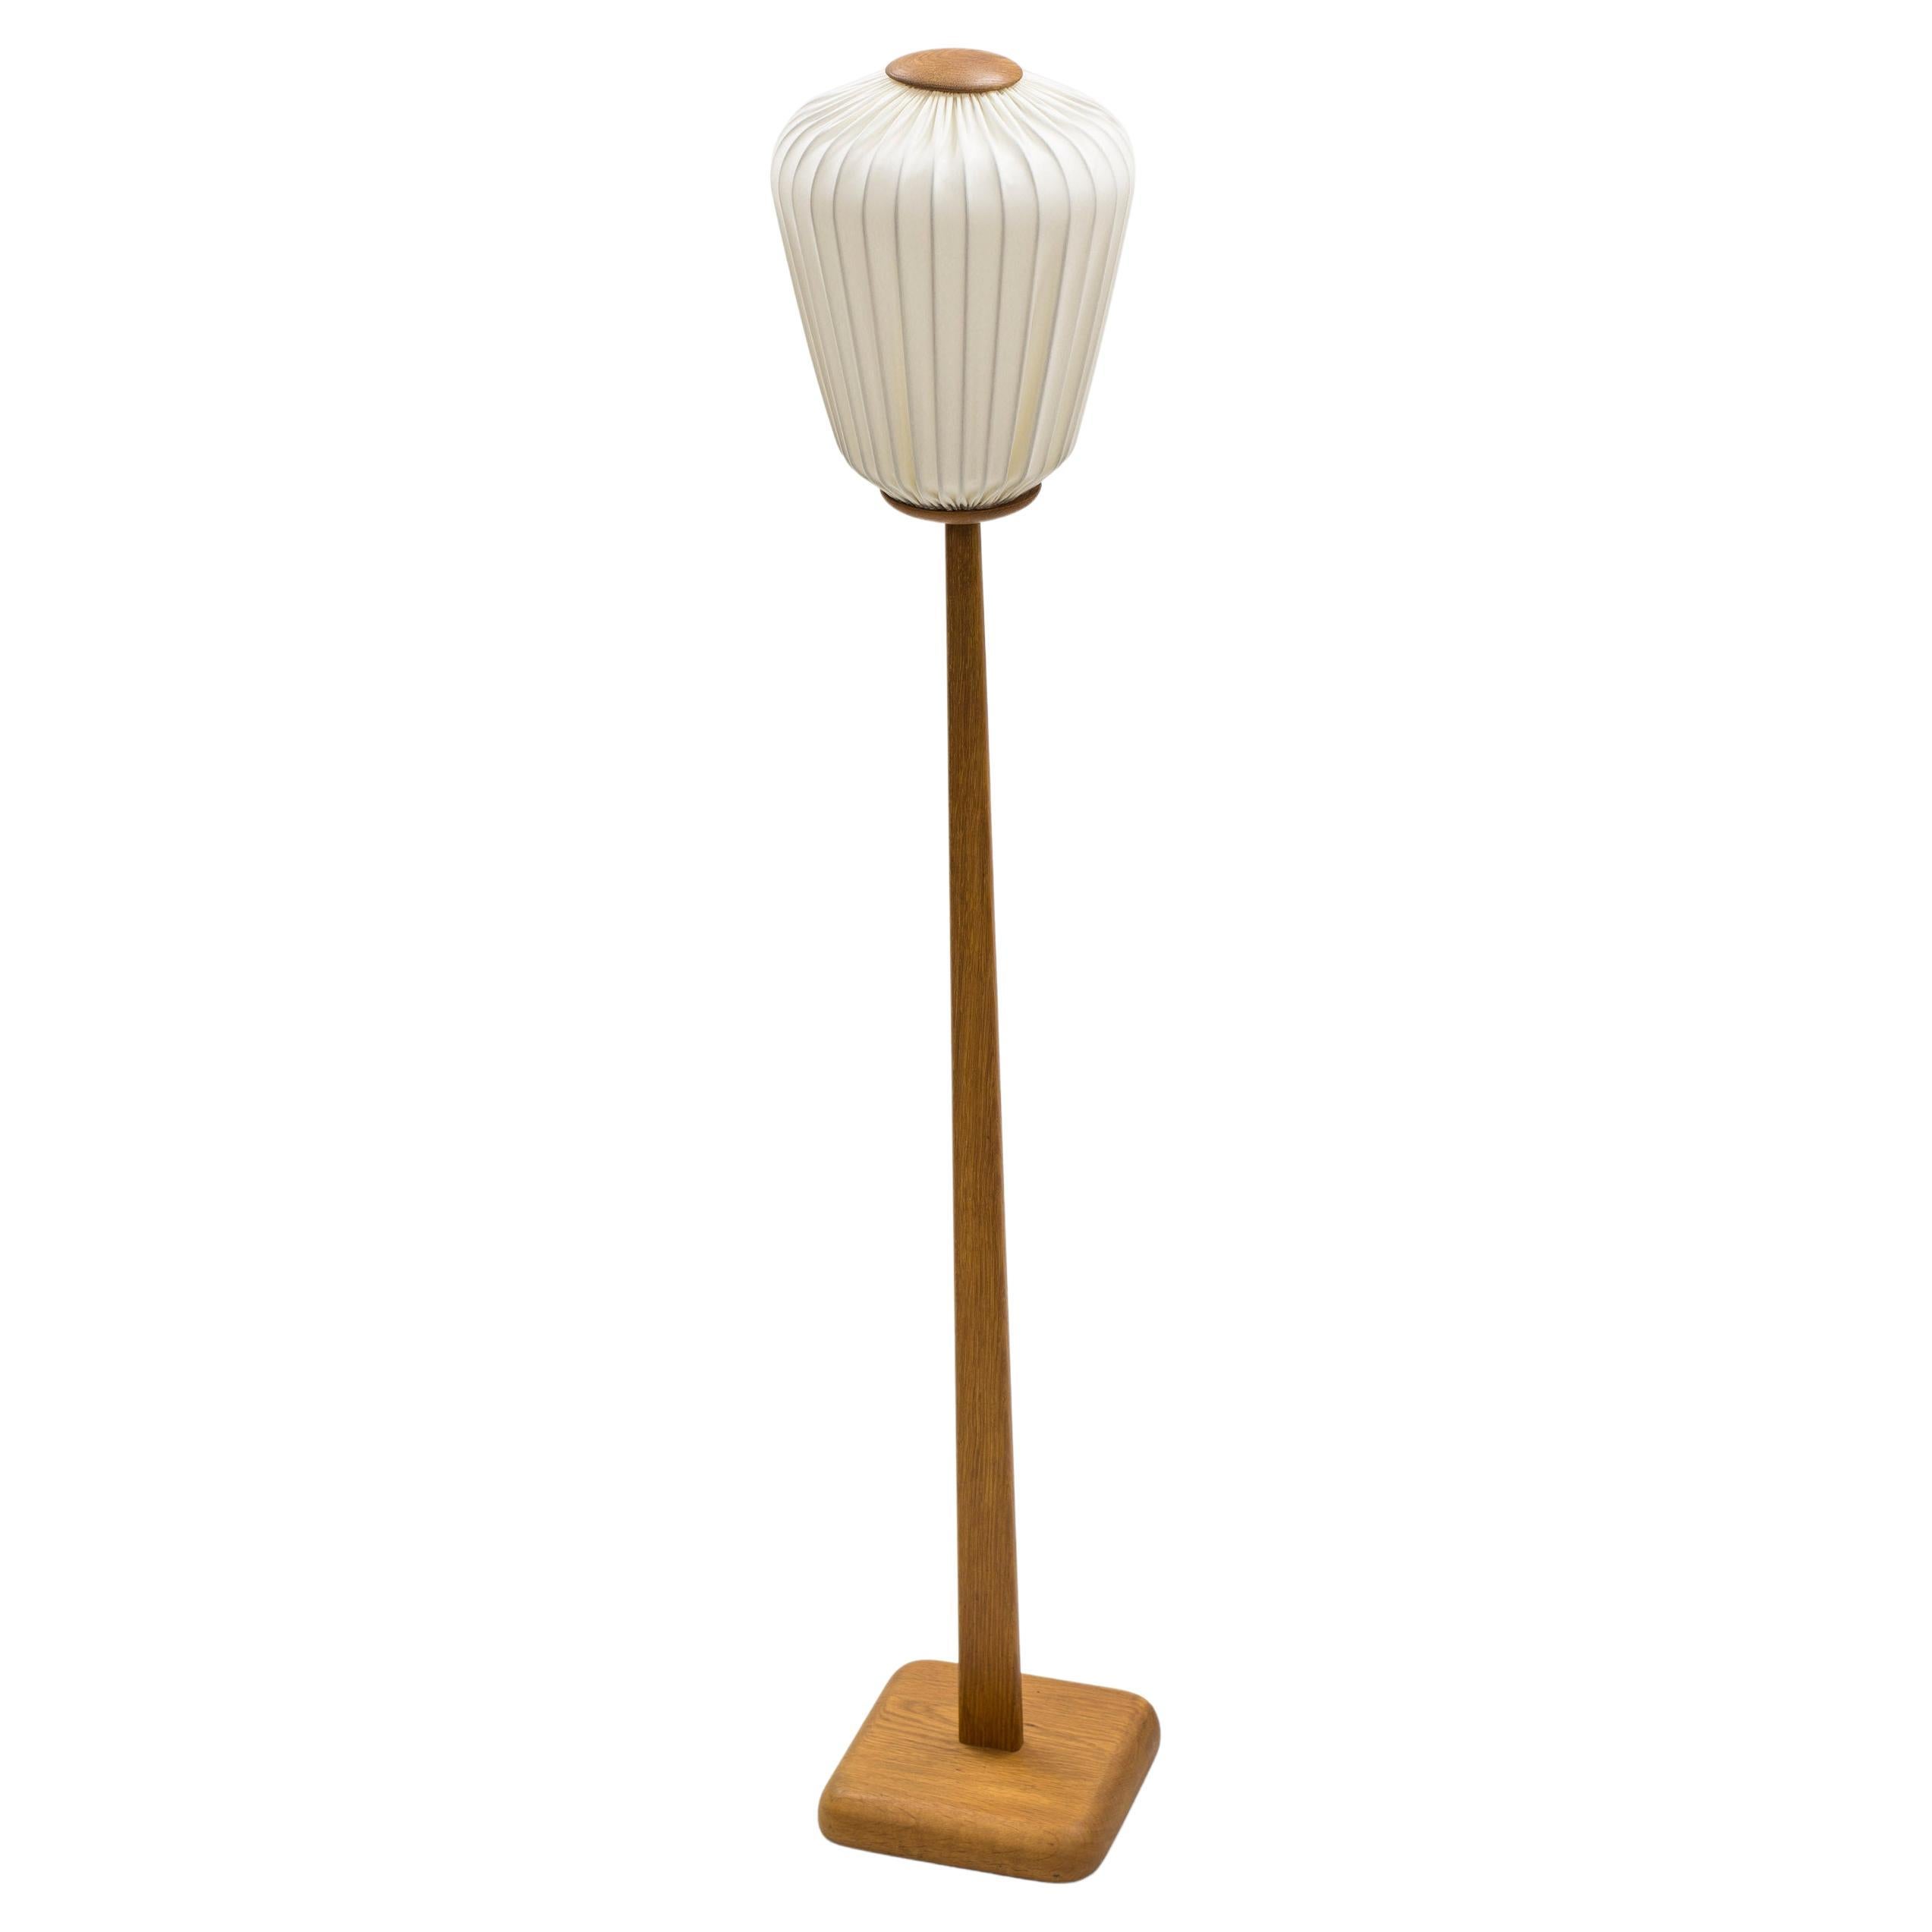 Earlt floor lamp in oak and fabric by Luxus, Uno Kristiansson, Sweden, 1950s For Sale